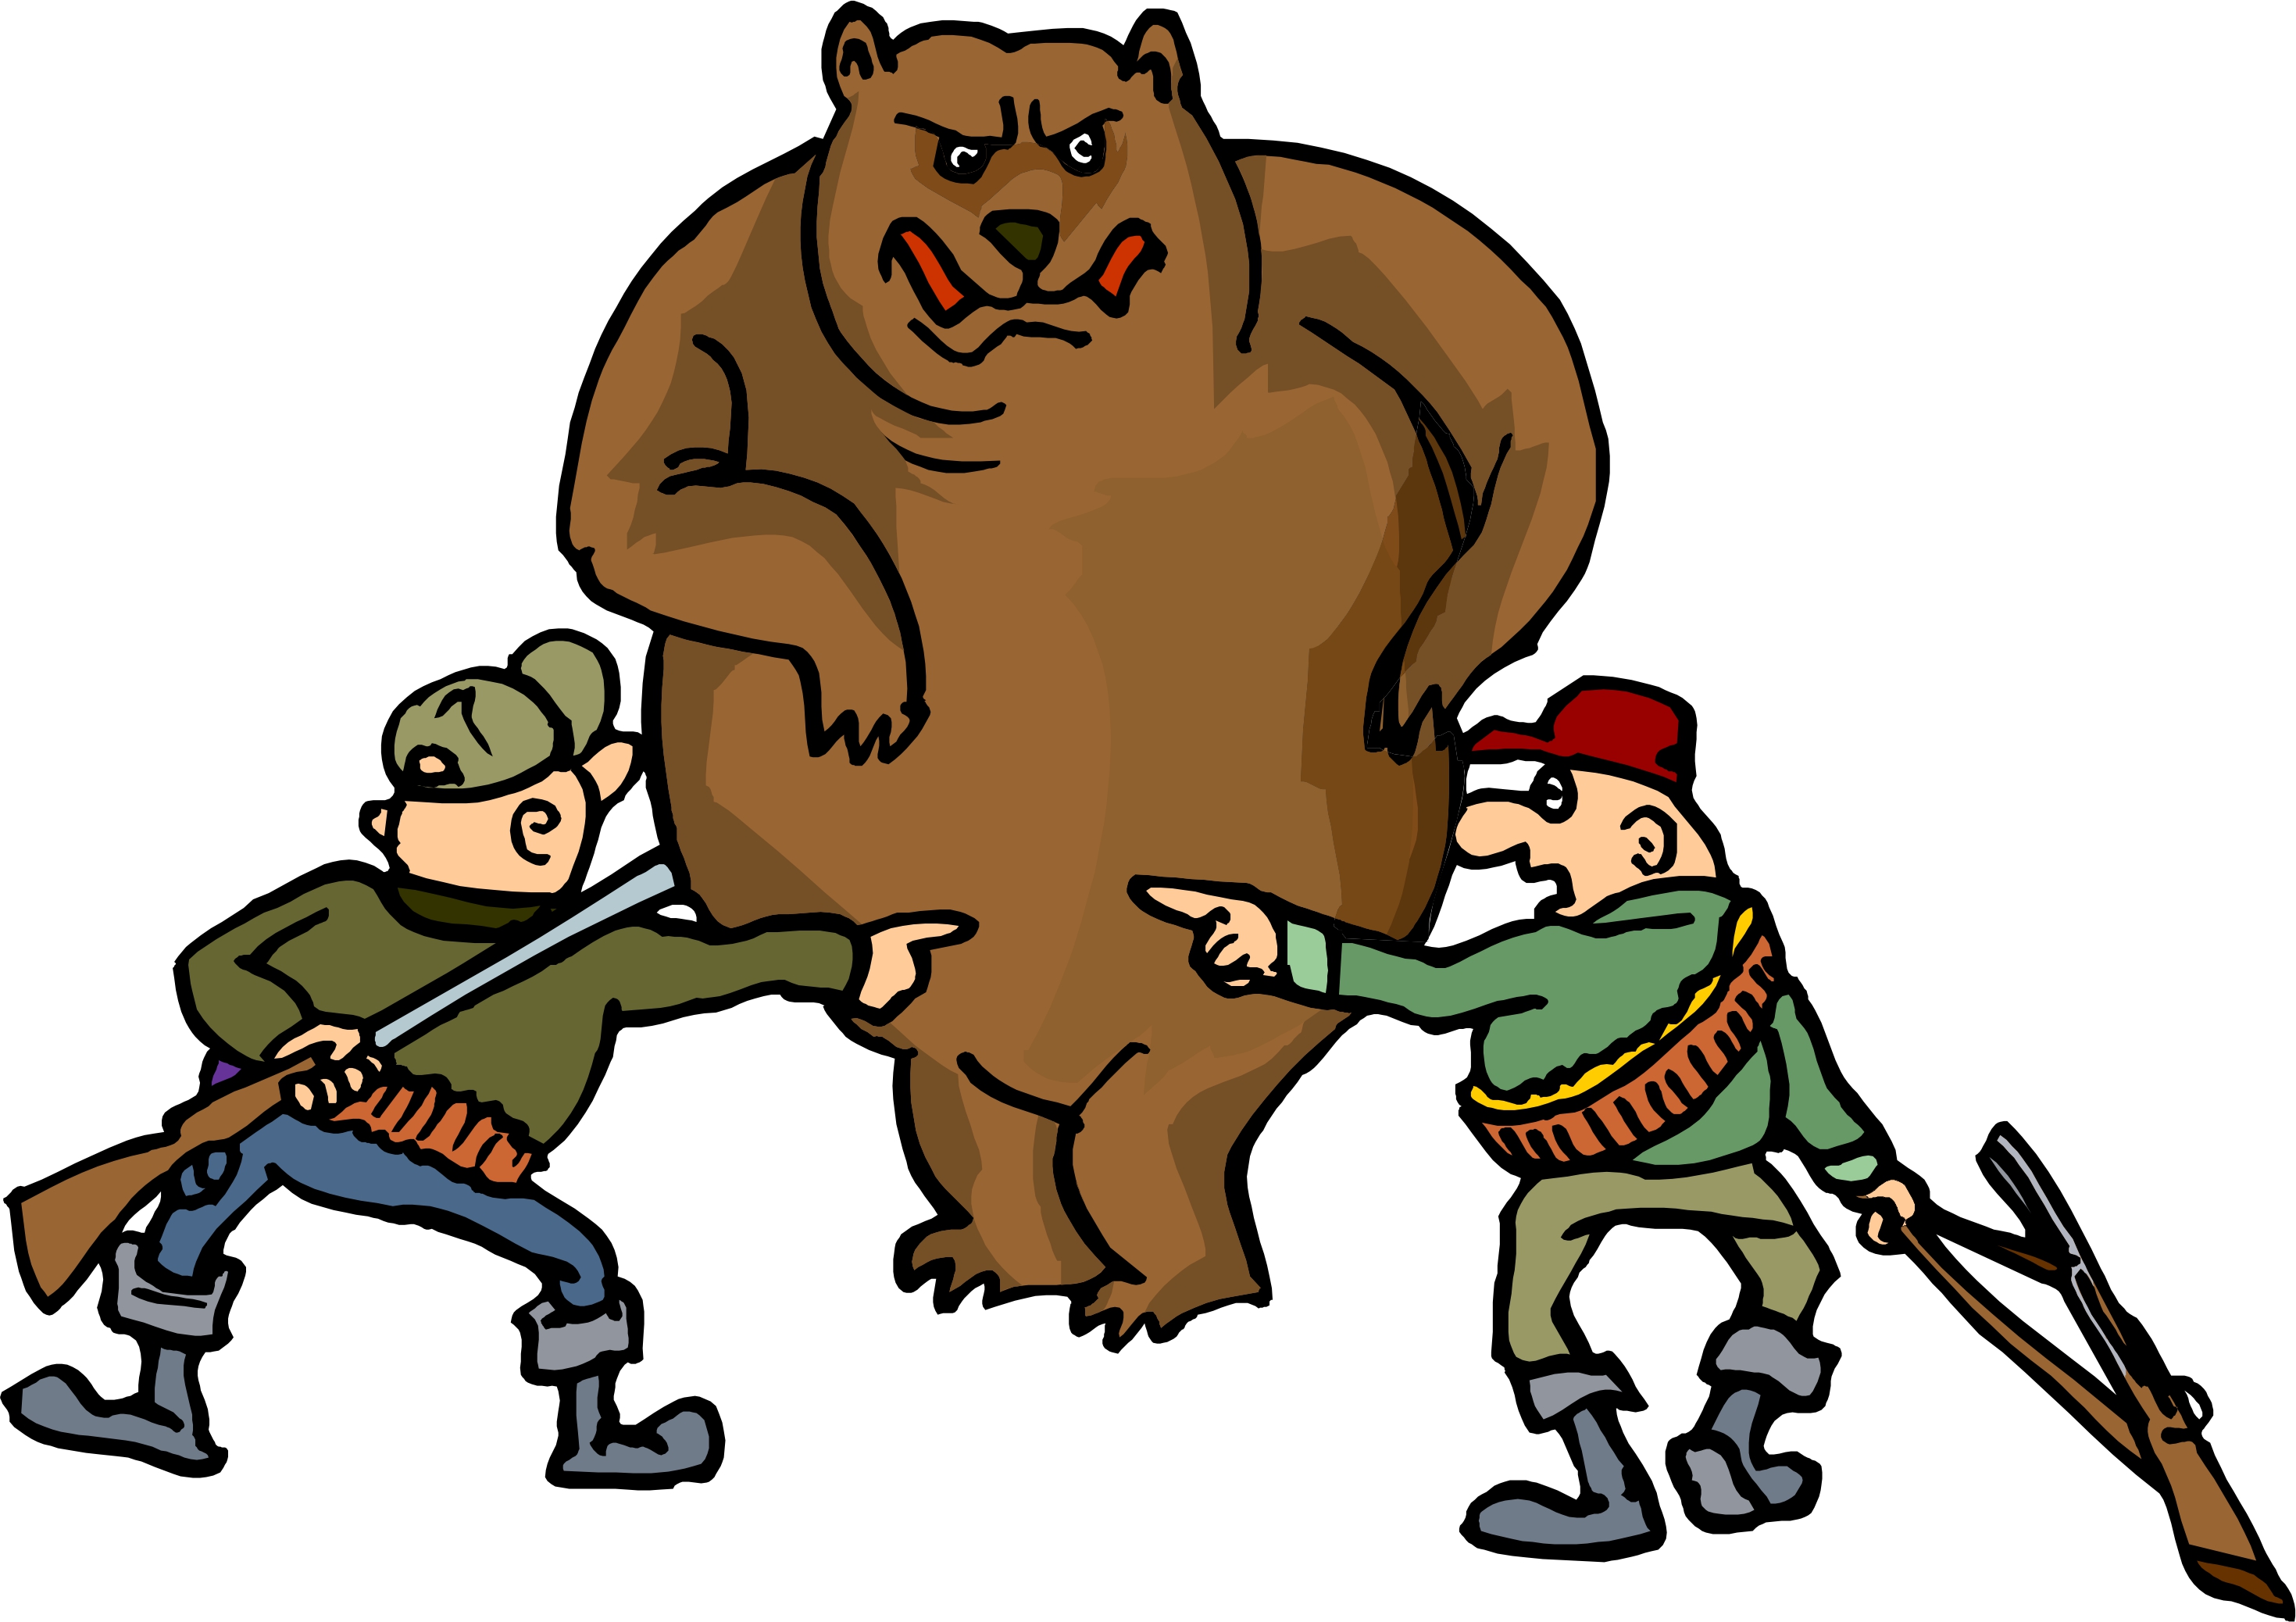 Angry Bear Cartoon Images  Pictures - Becuo